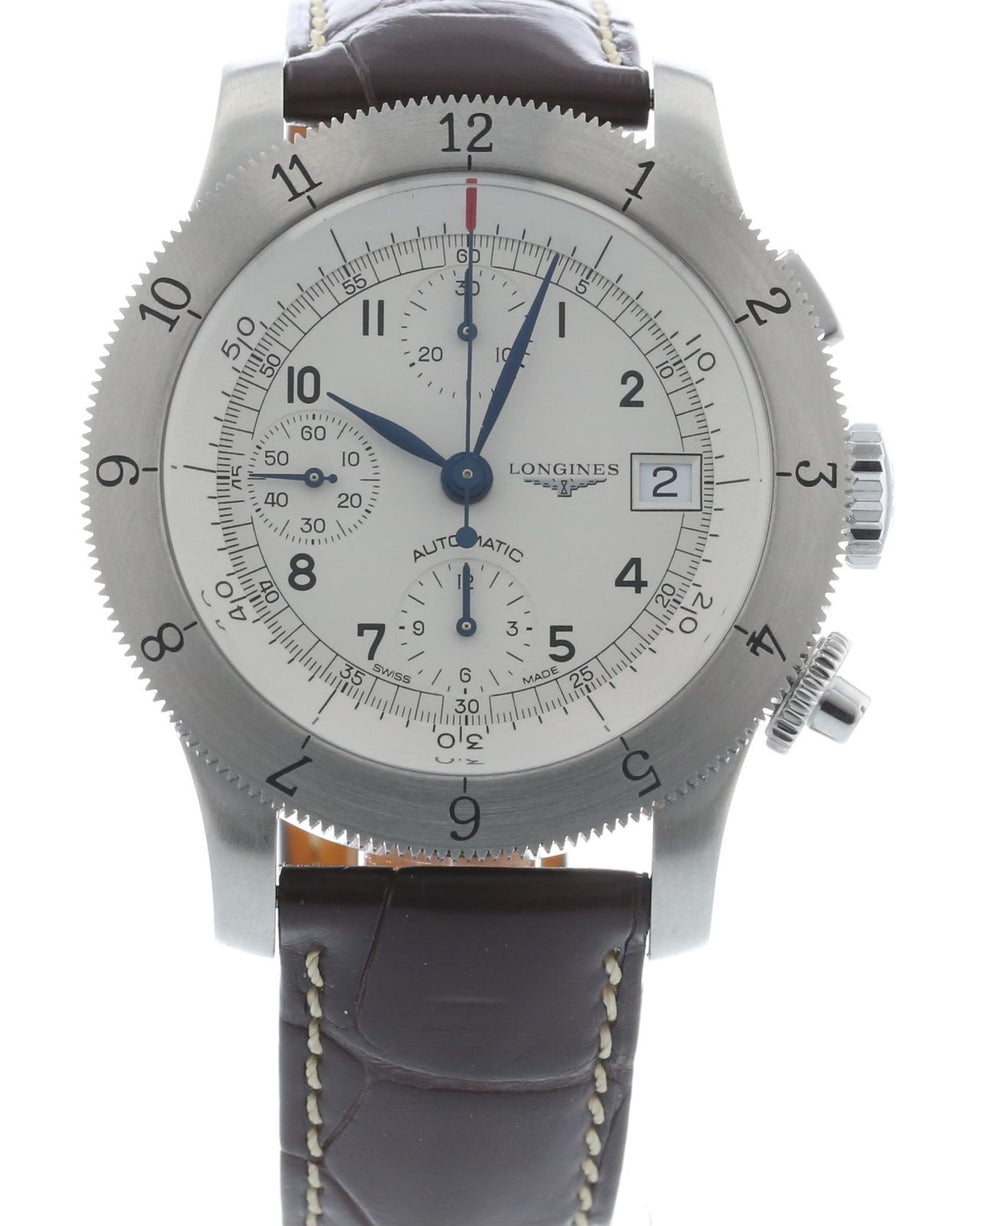 Longines Heritage Wims Chronograph L2.741.4.73.2 1